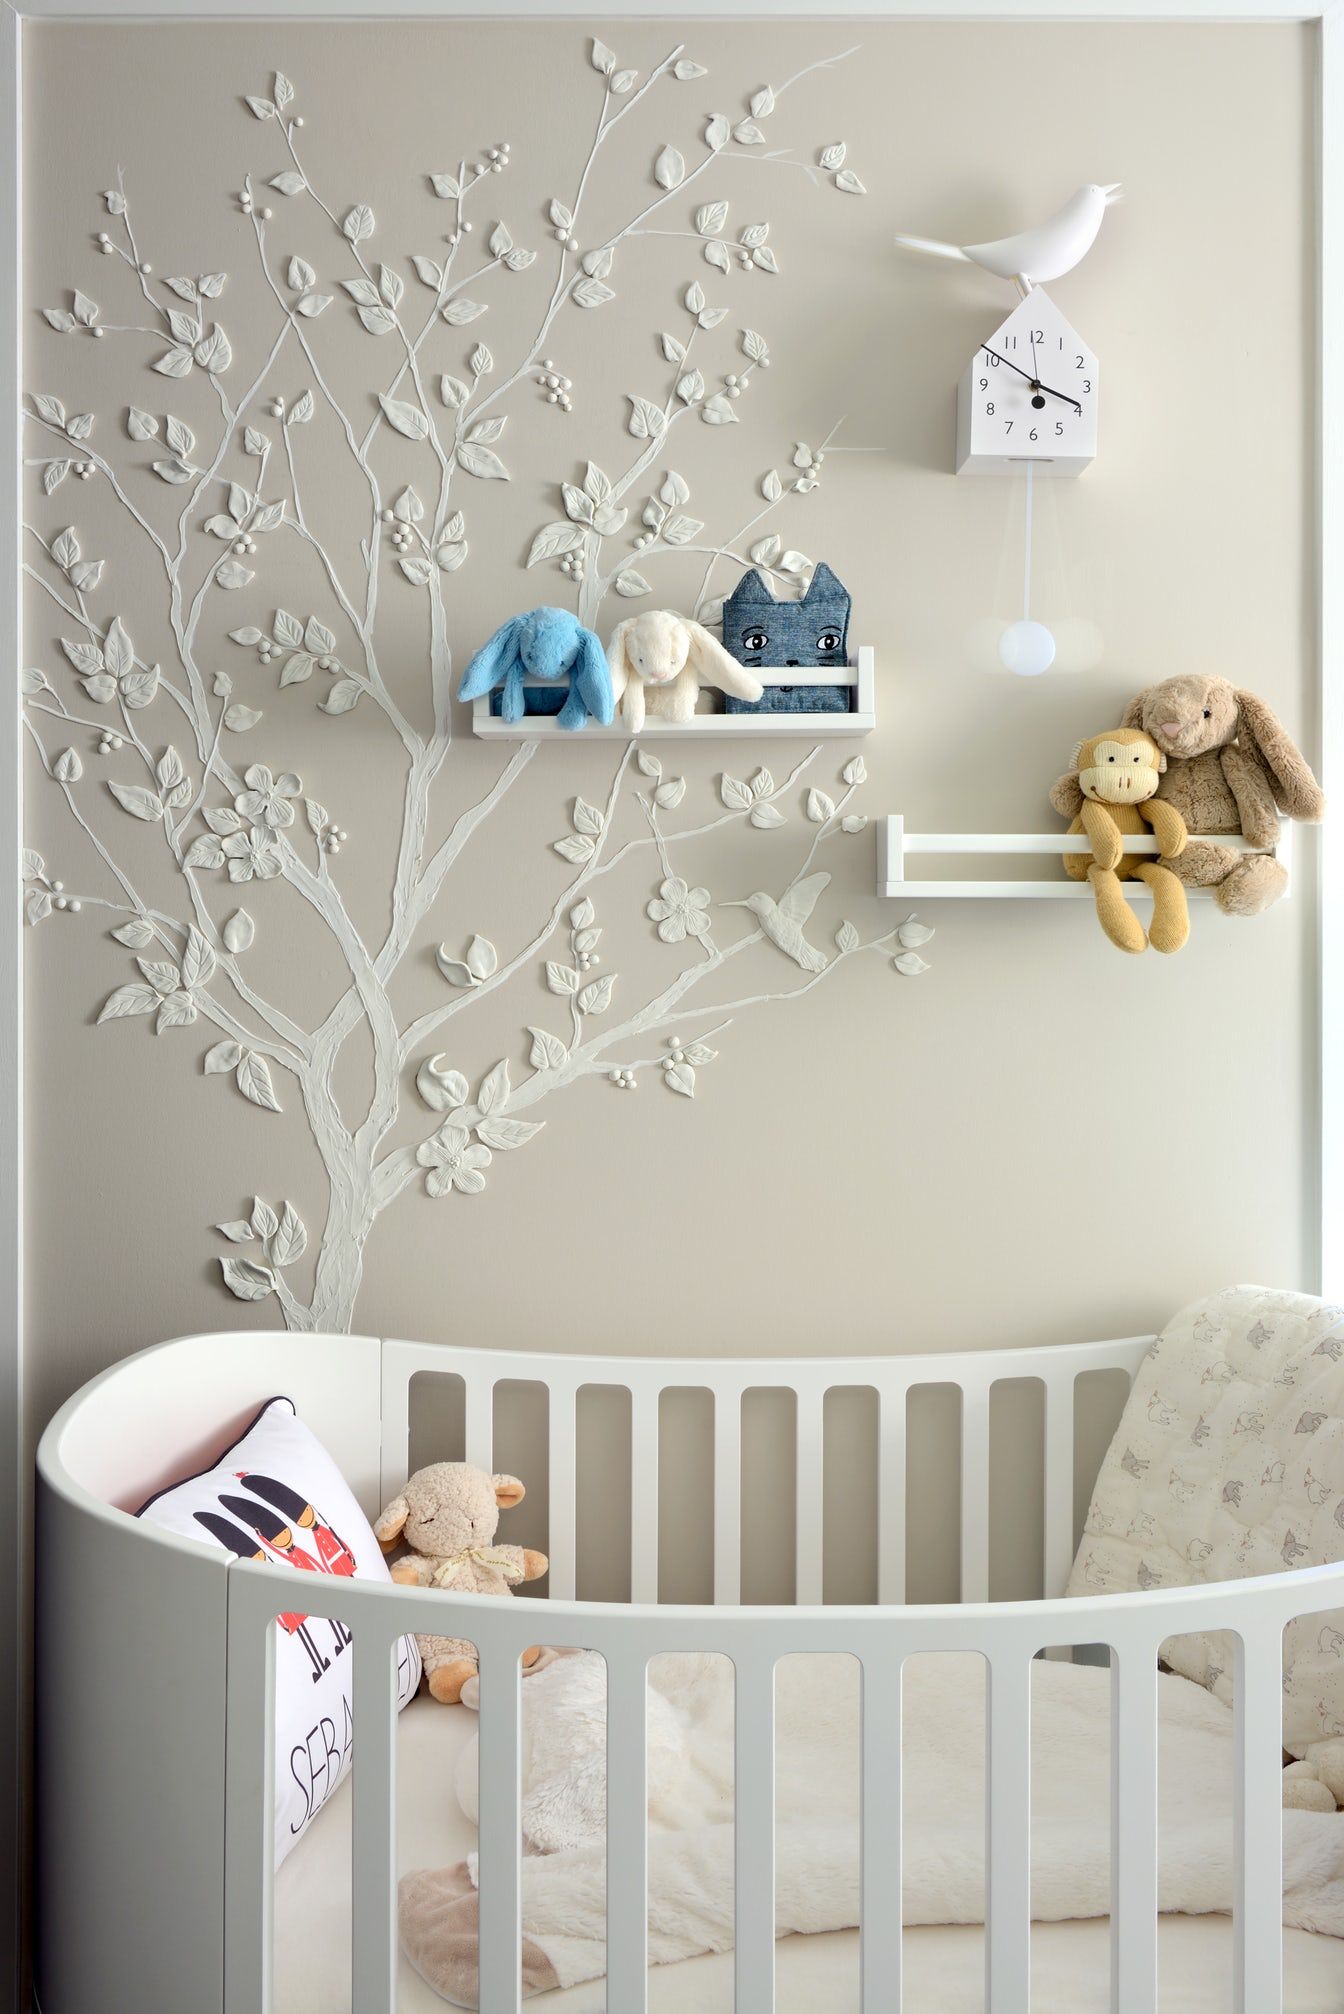 Chic Baby Room Design Ideas - How to Decorate a Nursery